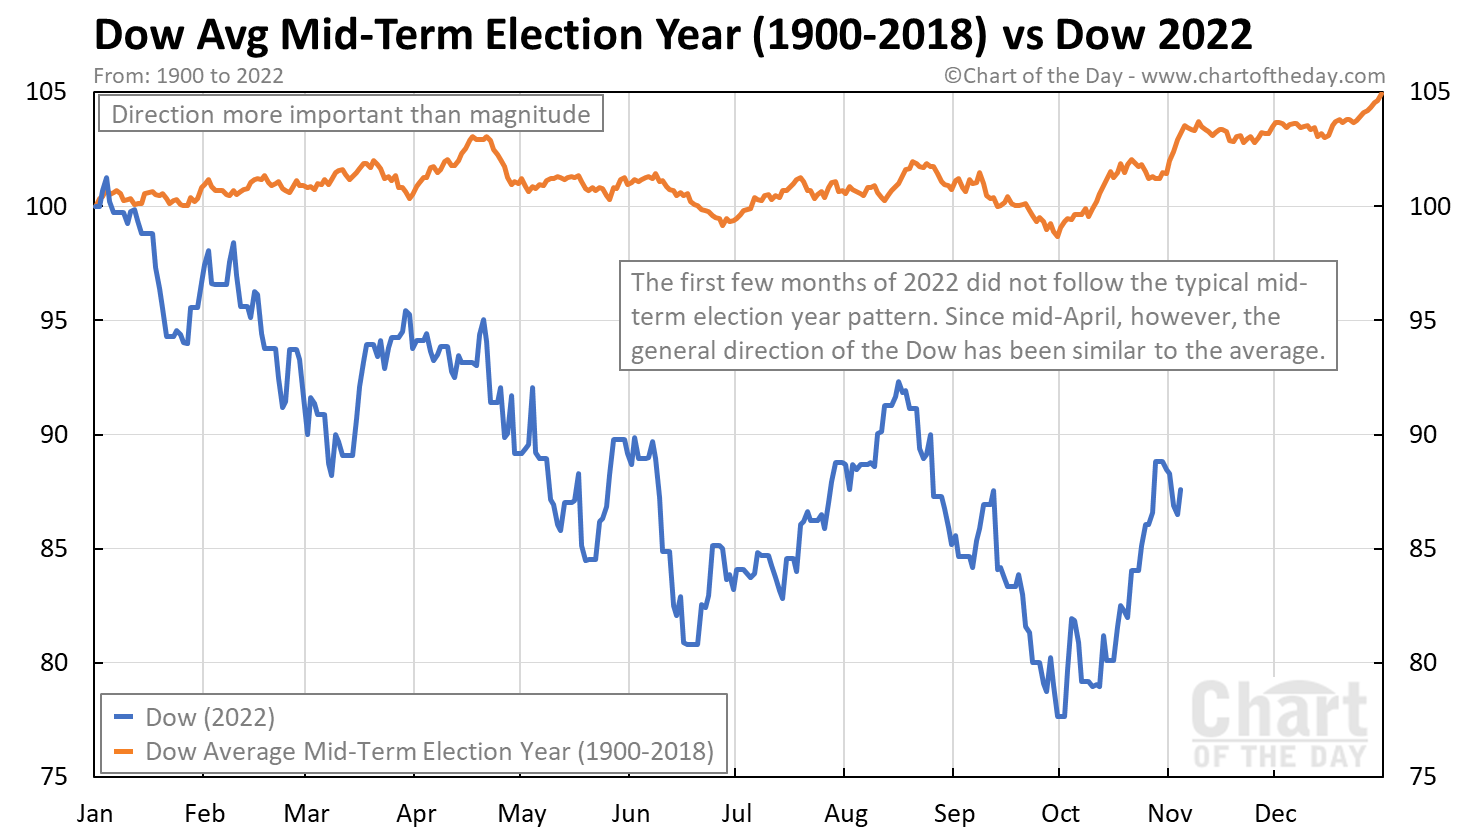 Dow Average Mid-Term Election Year vs Average Year (1900-2022)